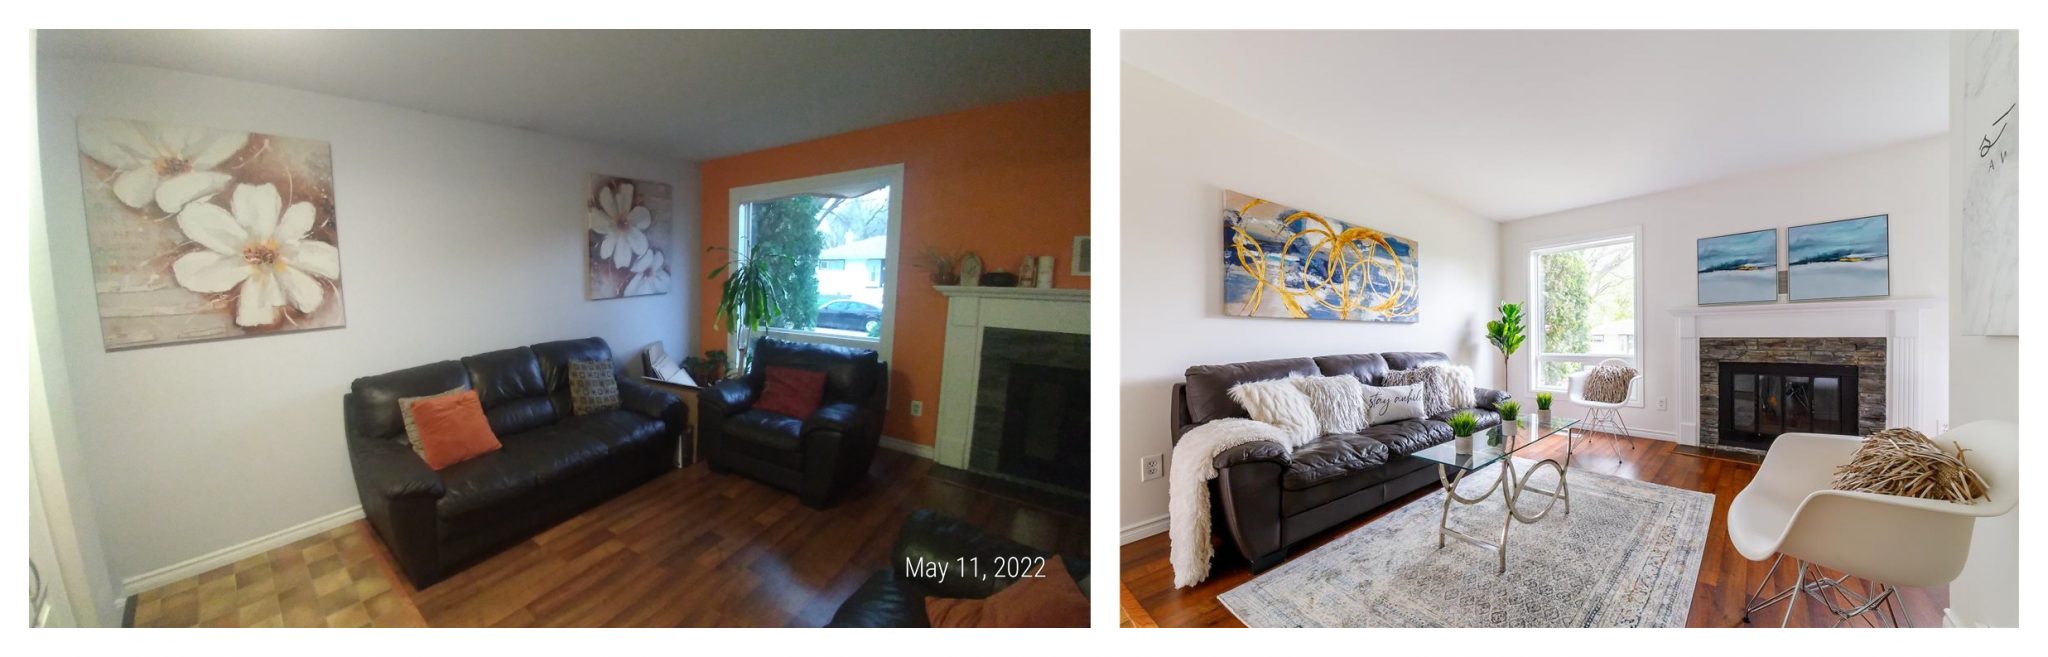 Winnipeg Home Staging - Before and After Pictures